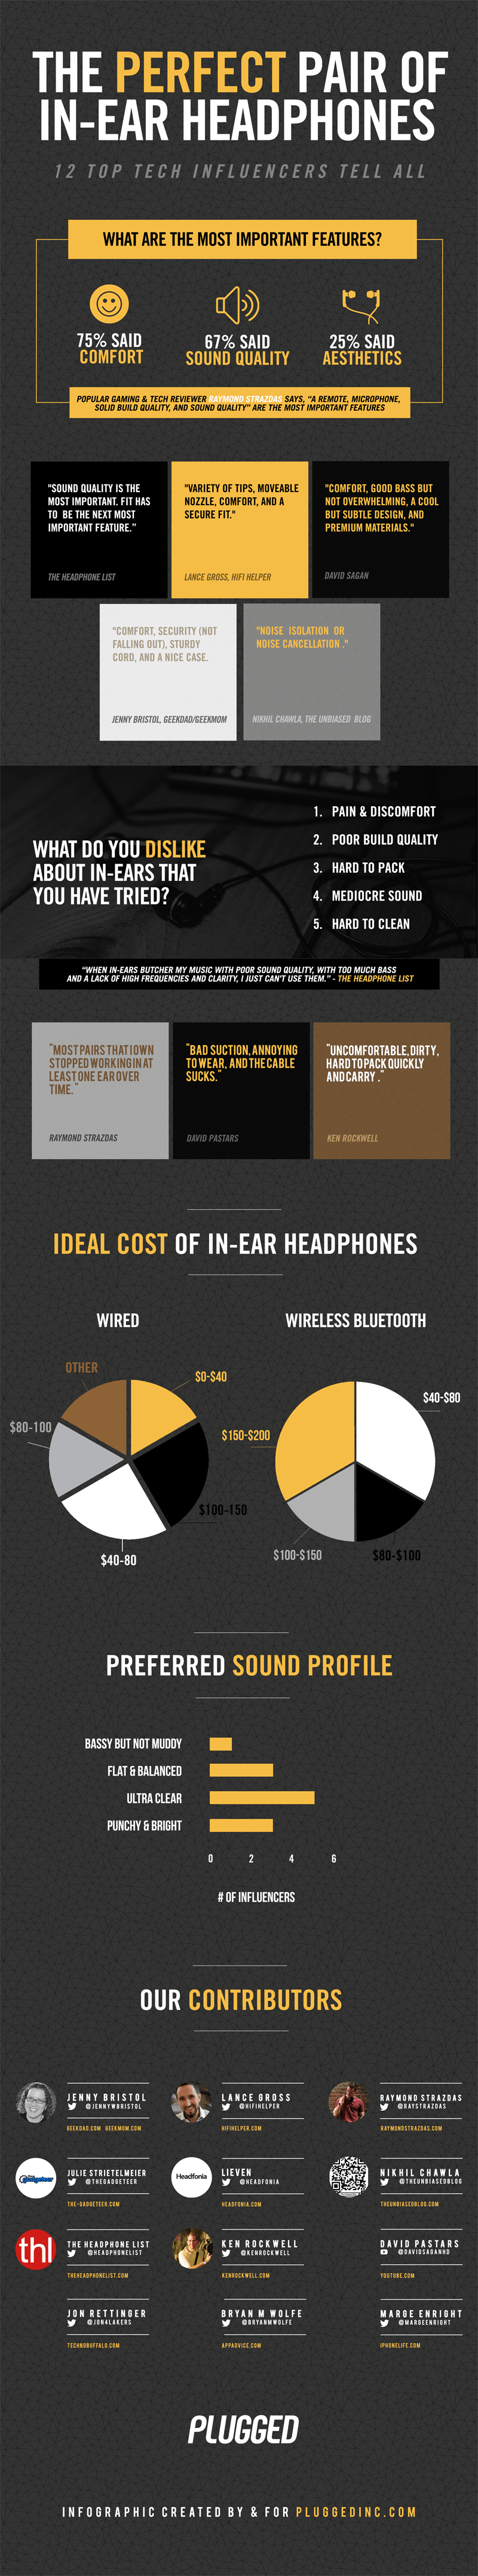 PLUGGED-Infographic-Final (1) 800px